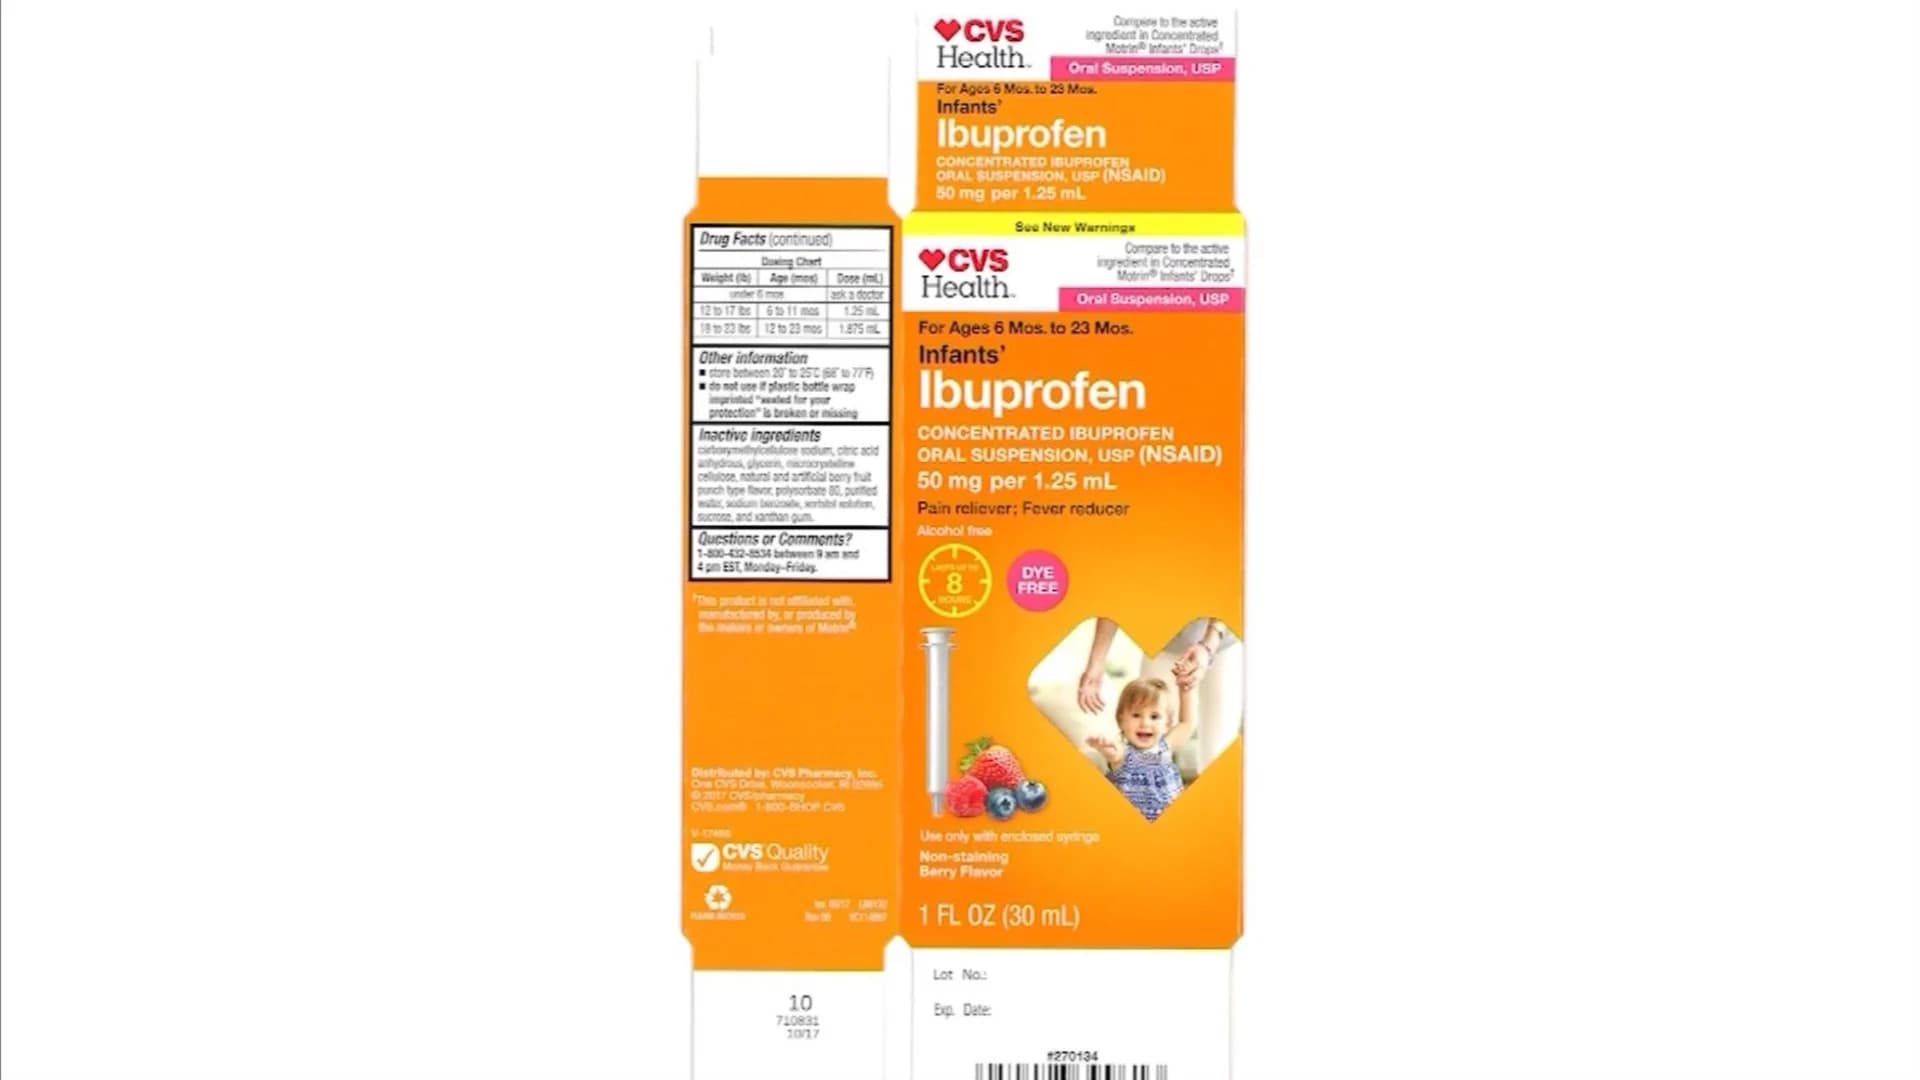 Voluntary recall of infants' ibuprofen expanded